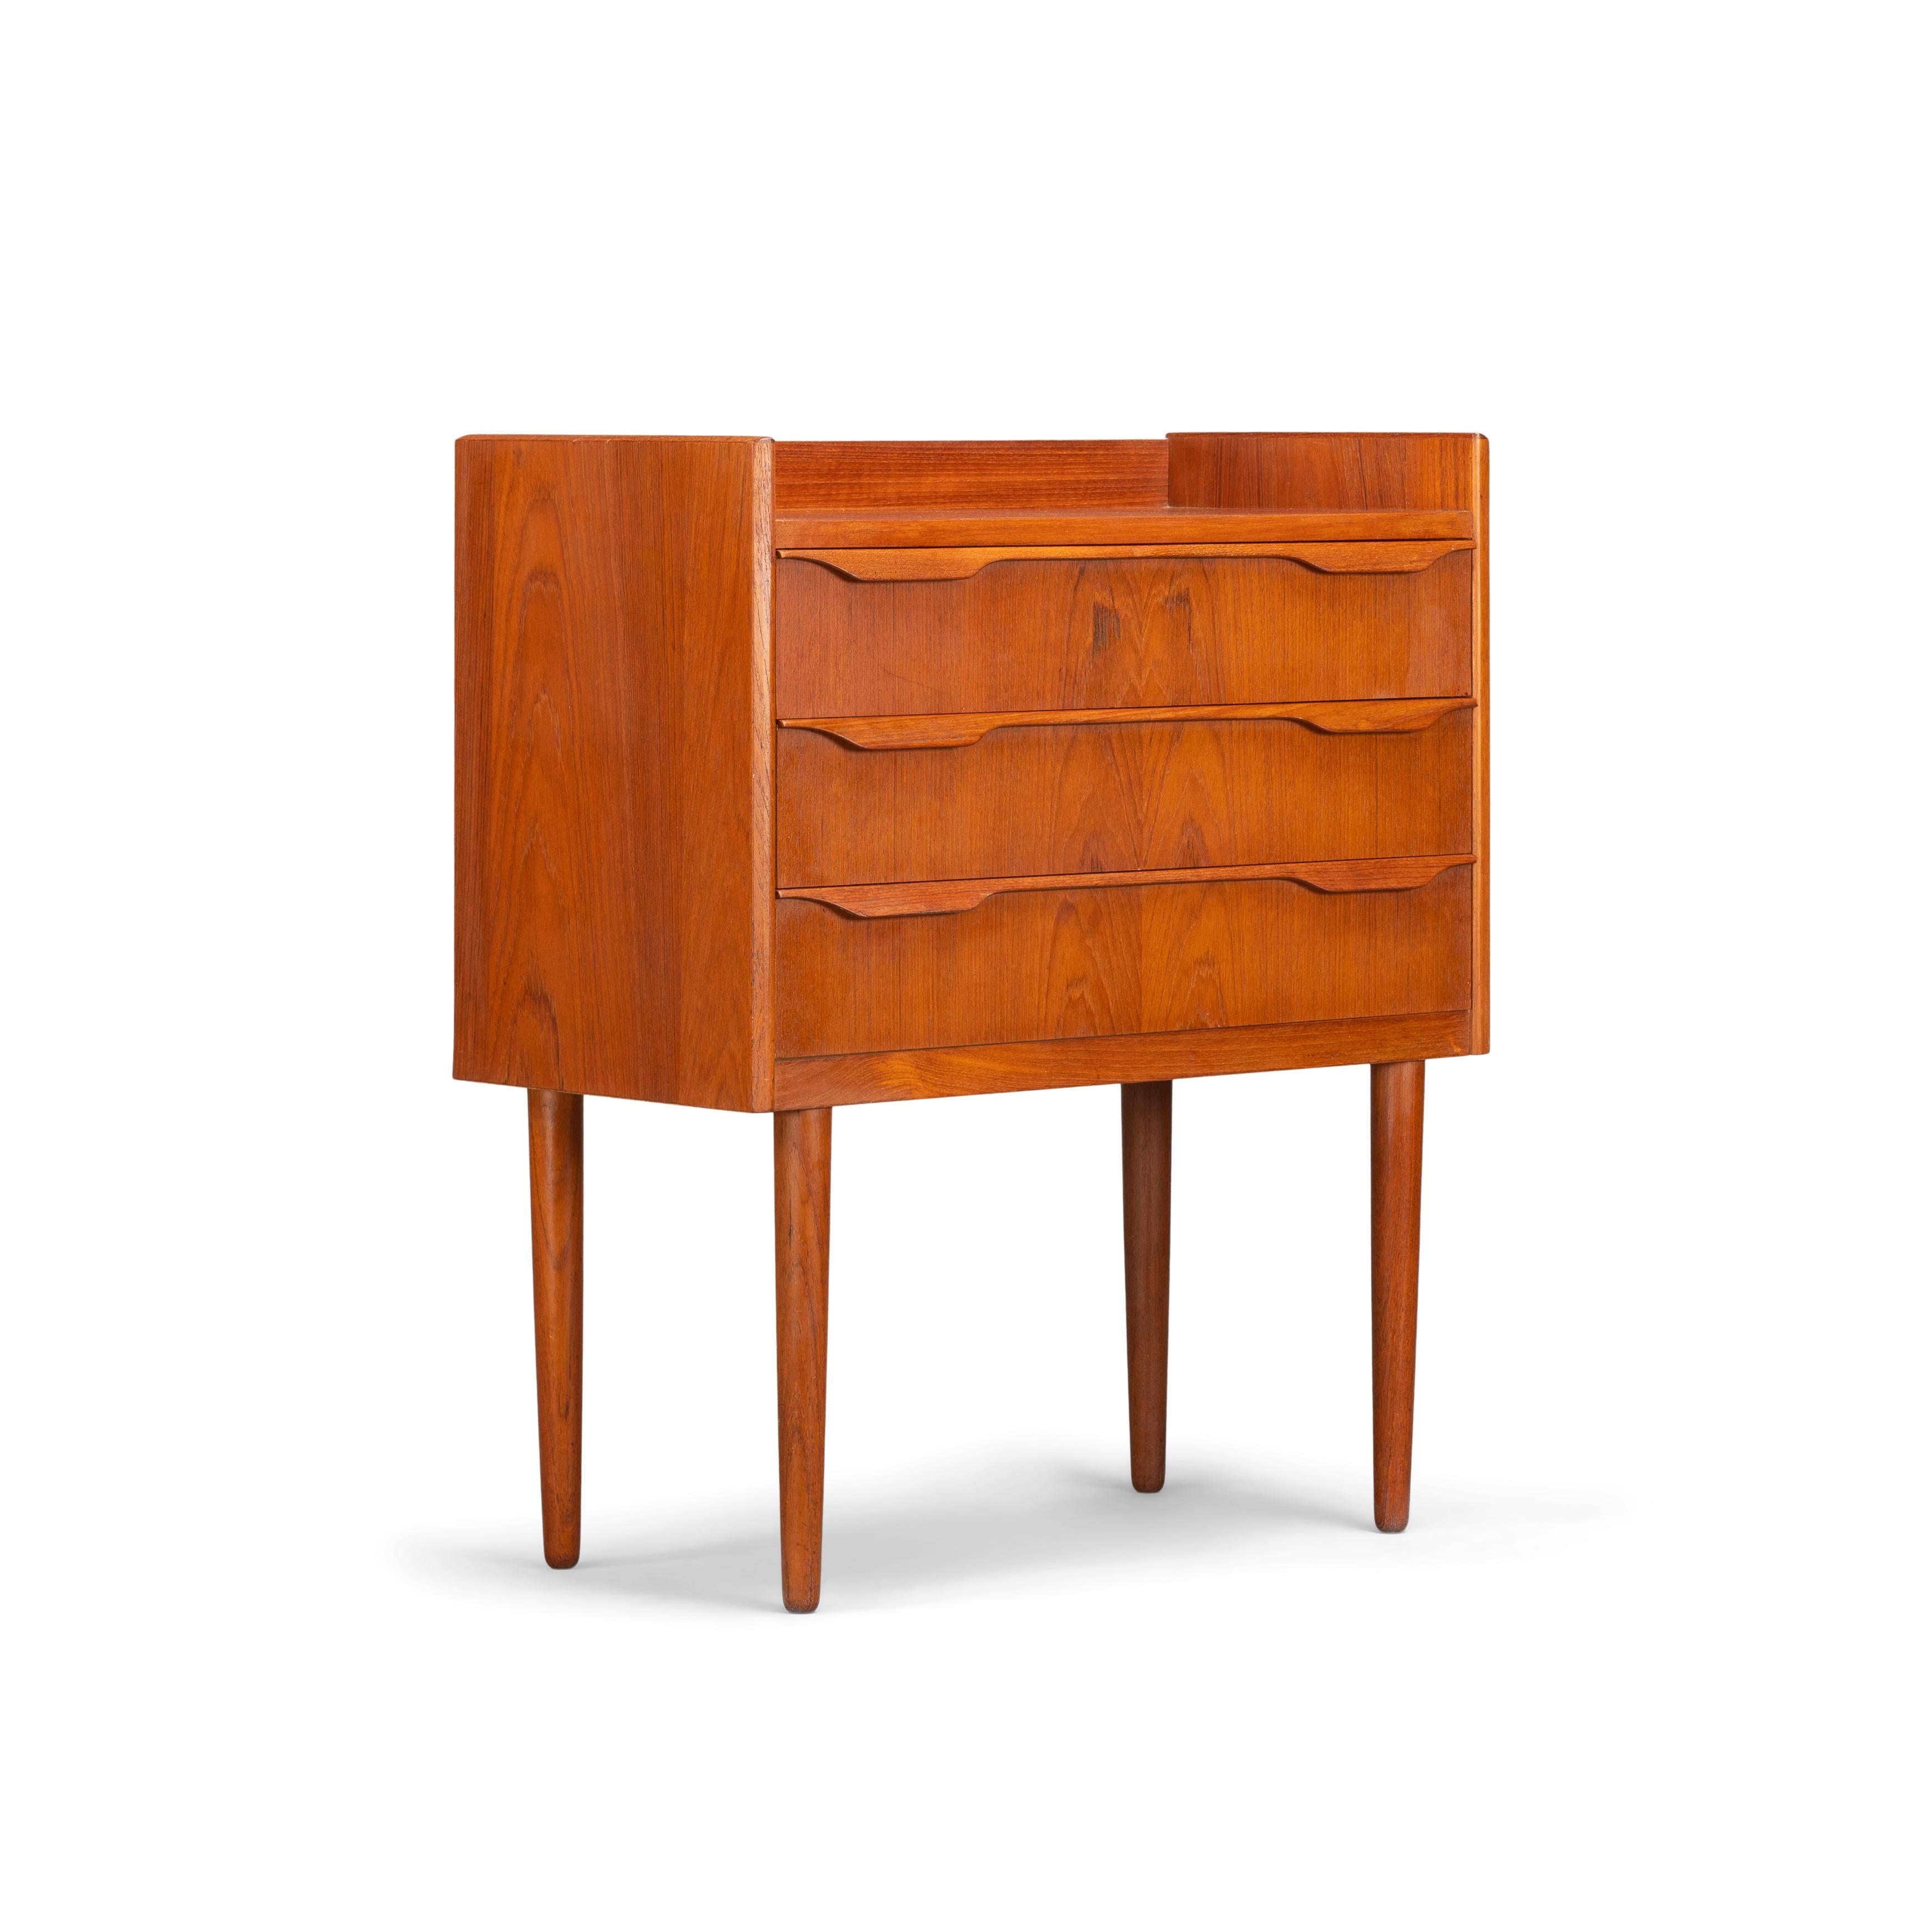 This Danish nightstand in teak veneer was made late 1960s and looks very charming on its tall solid teak legs. Three drawers with a solid wooden grip attached onto the middle of each drawer makes the style of this nightstand complete. Unfortunately